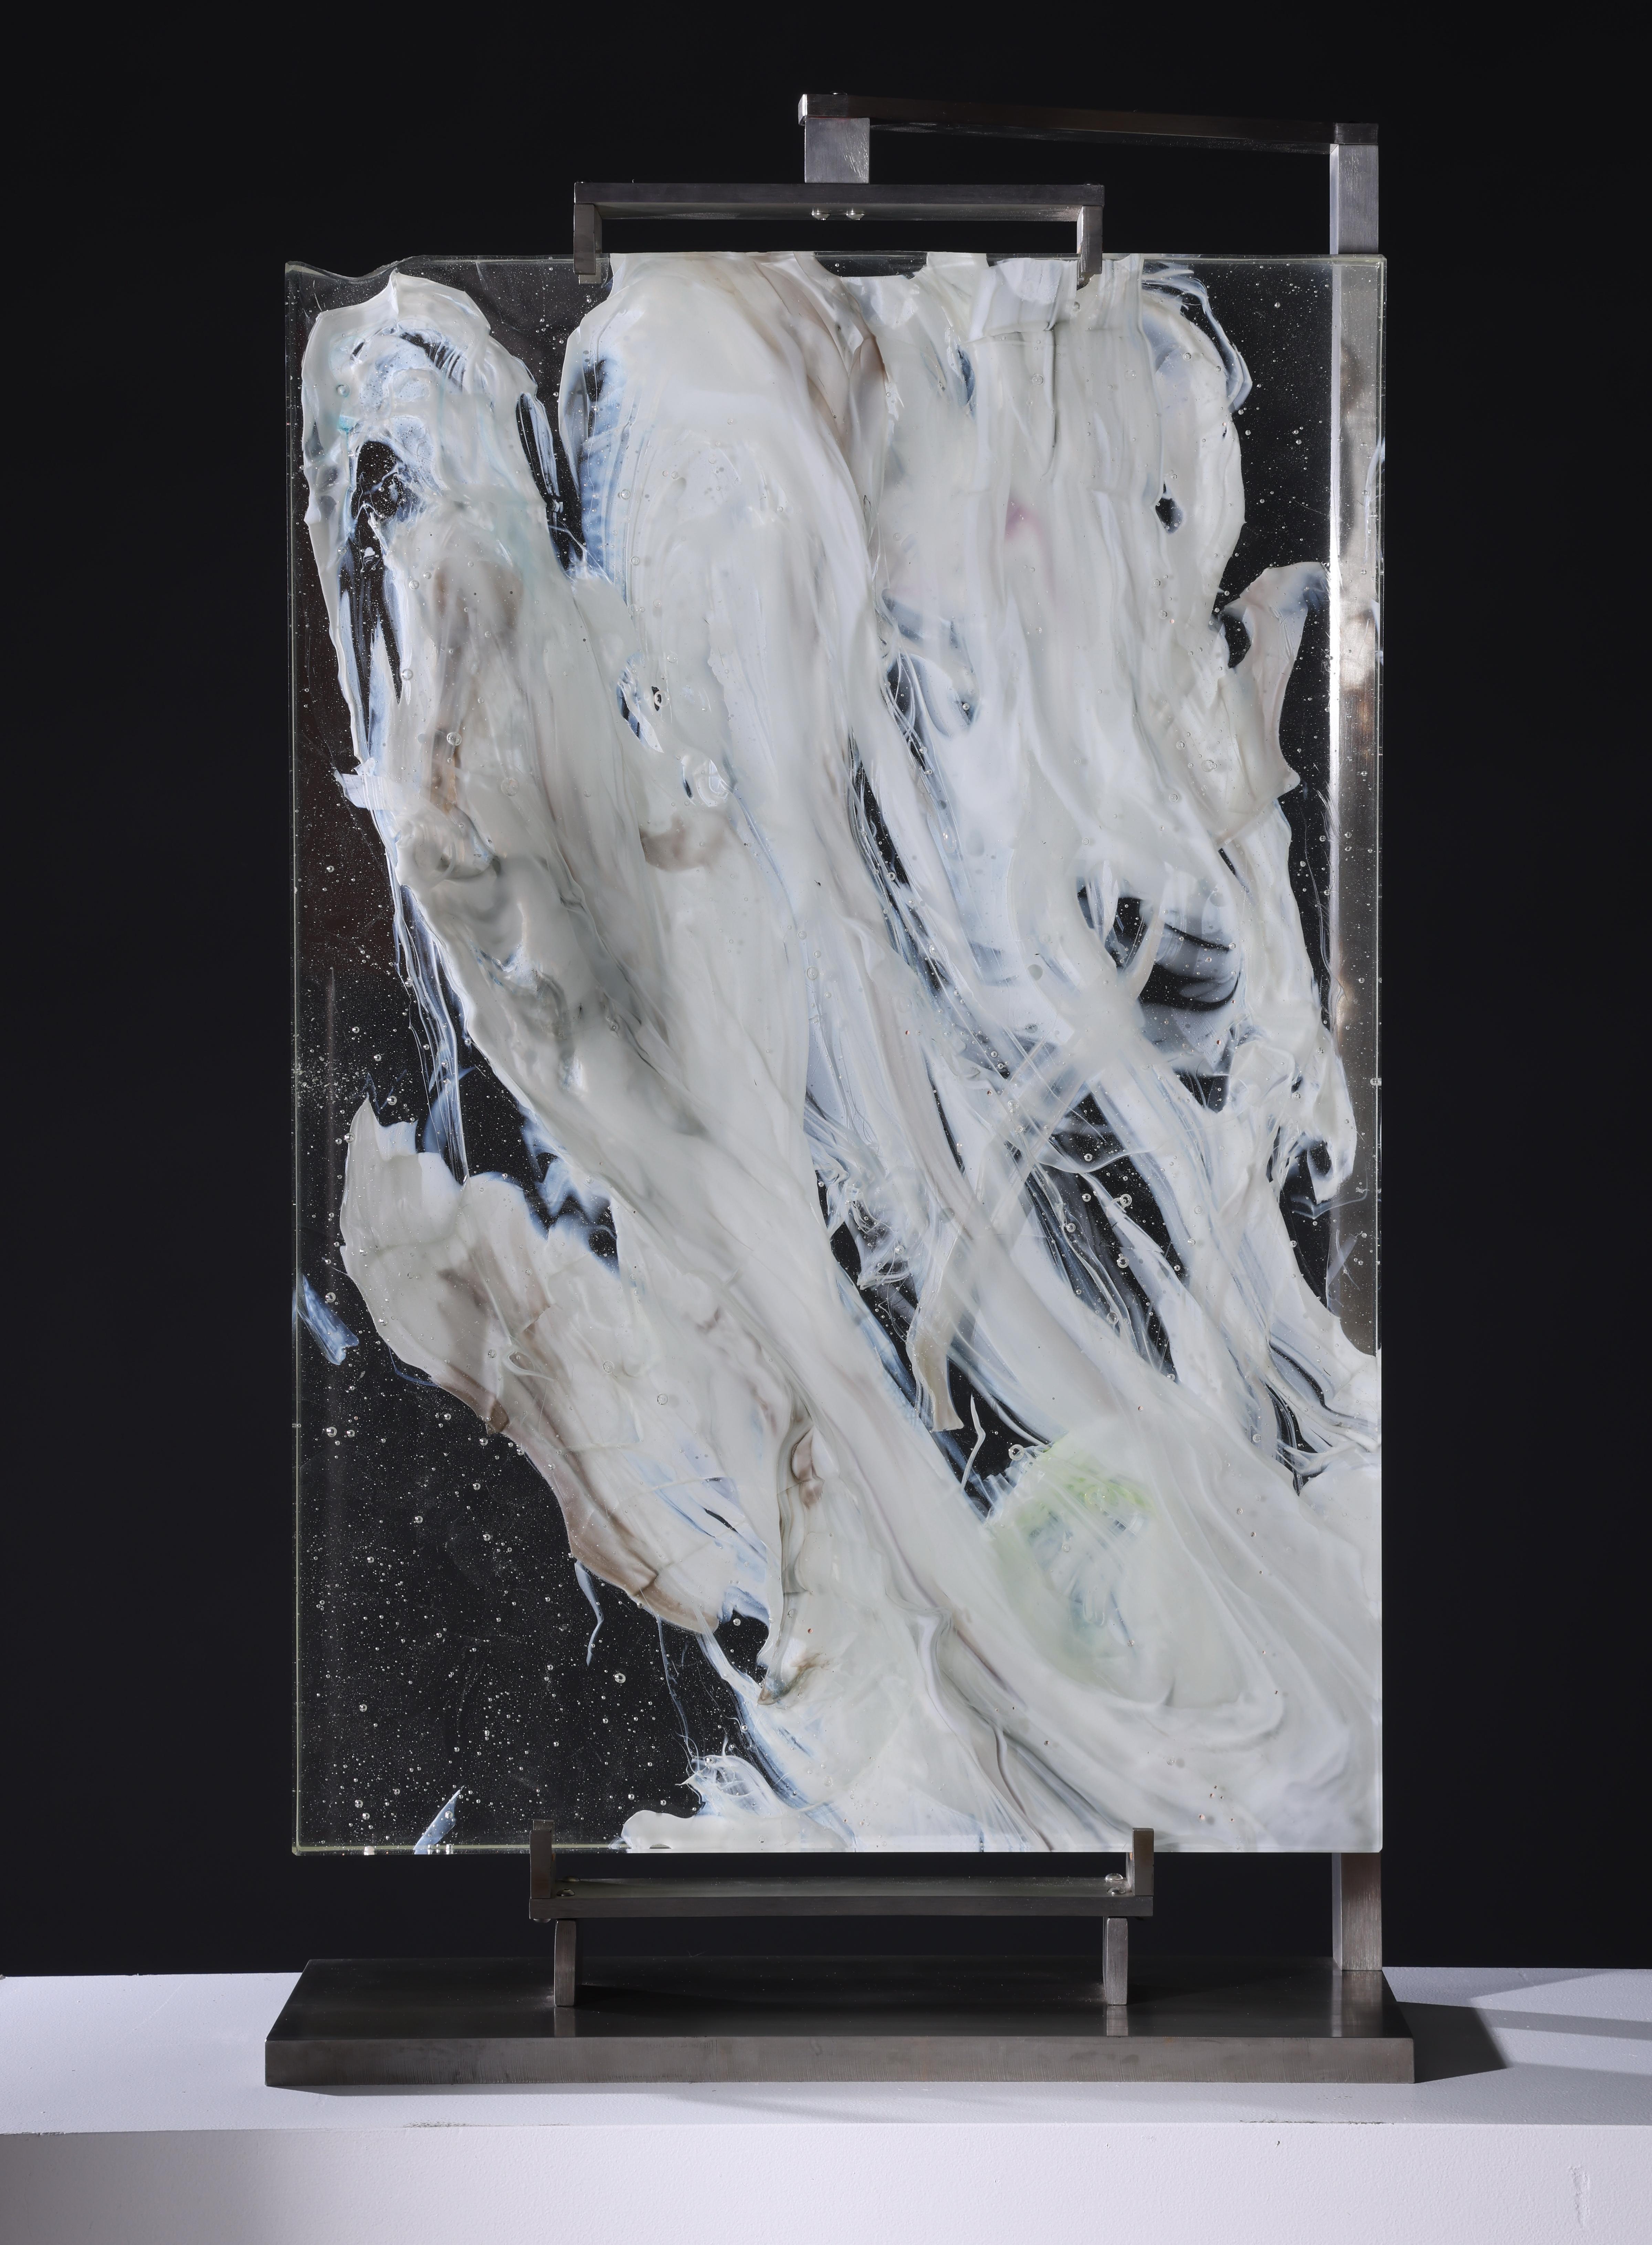 Cloud Study #5 is a contemporary abstract glass sculpture by David Ruth from his Cloud Study Series. It contains hues of white, yellow and black painterly brushstroke formations in glass called trails. Trails are created through rolling molten glass